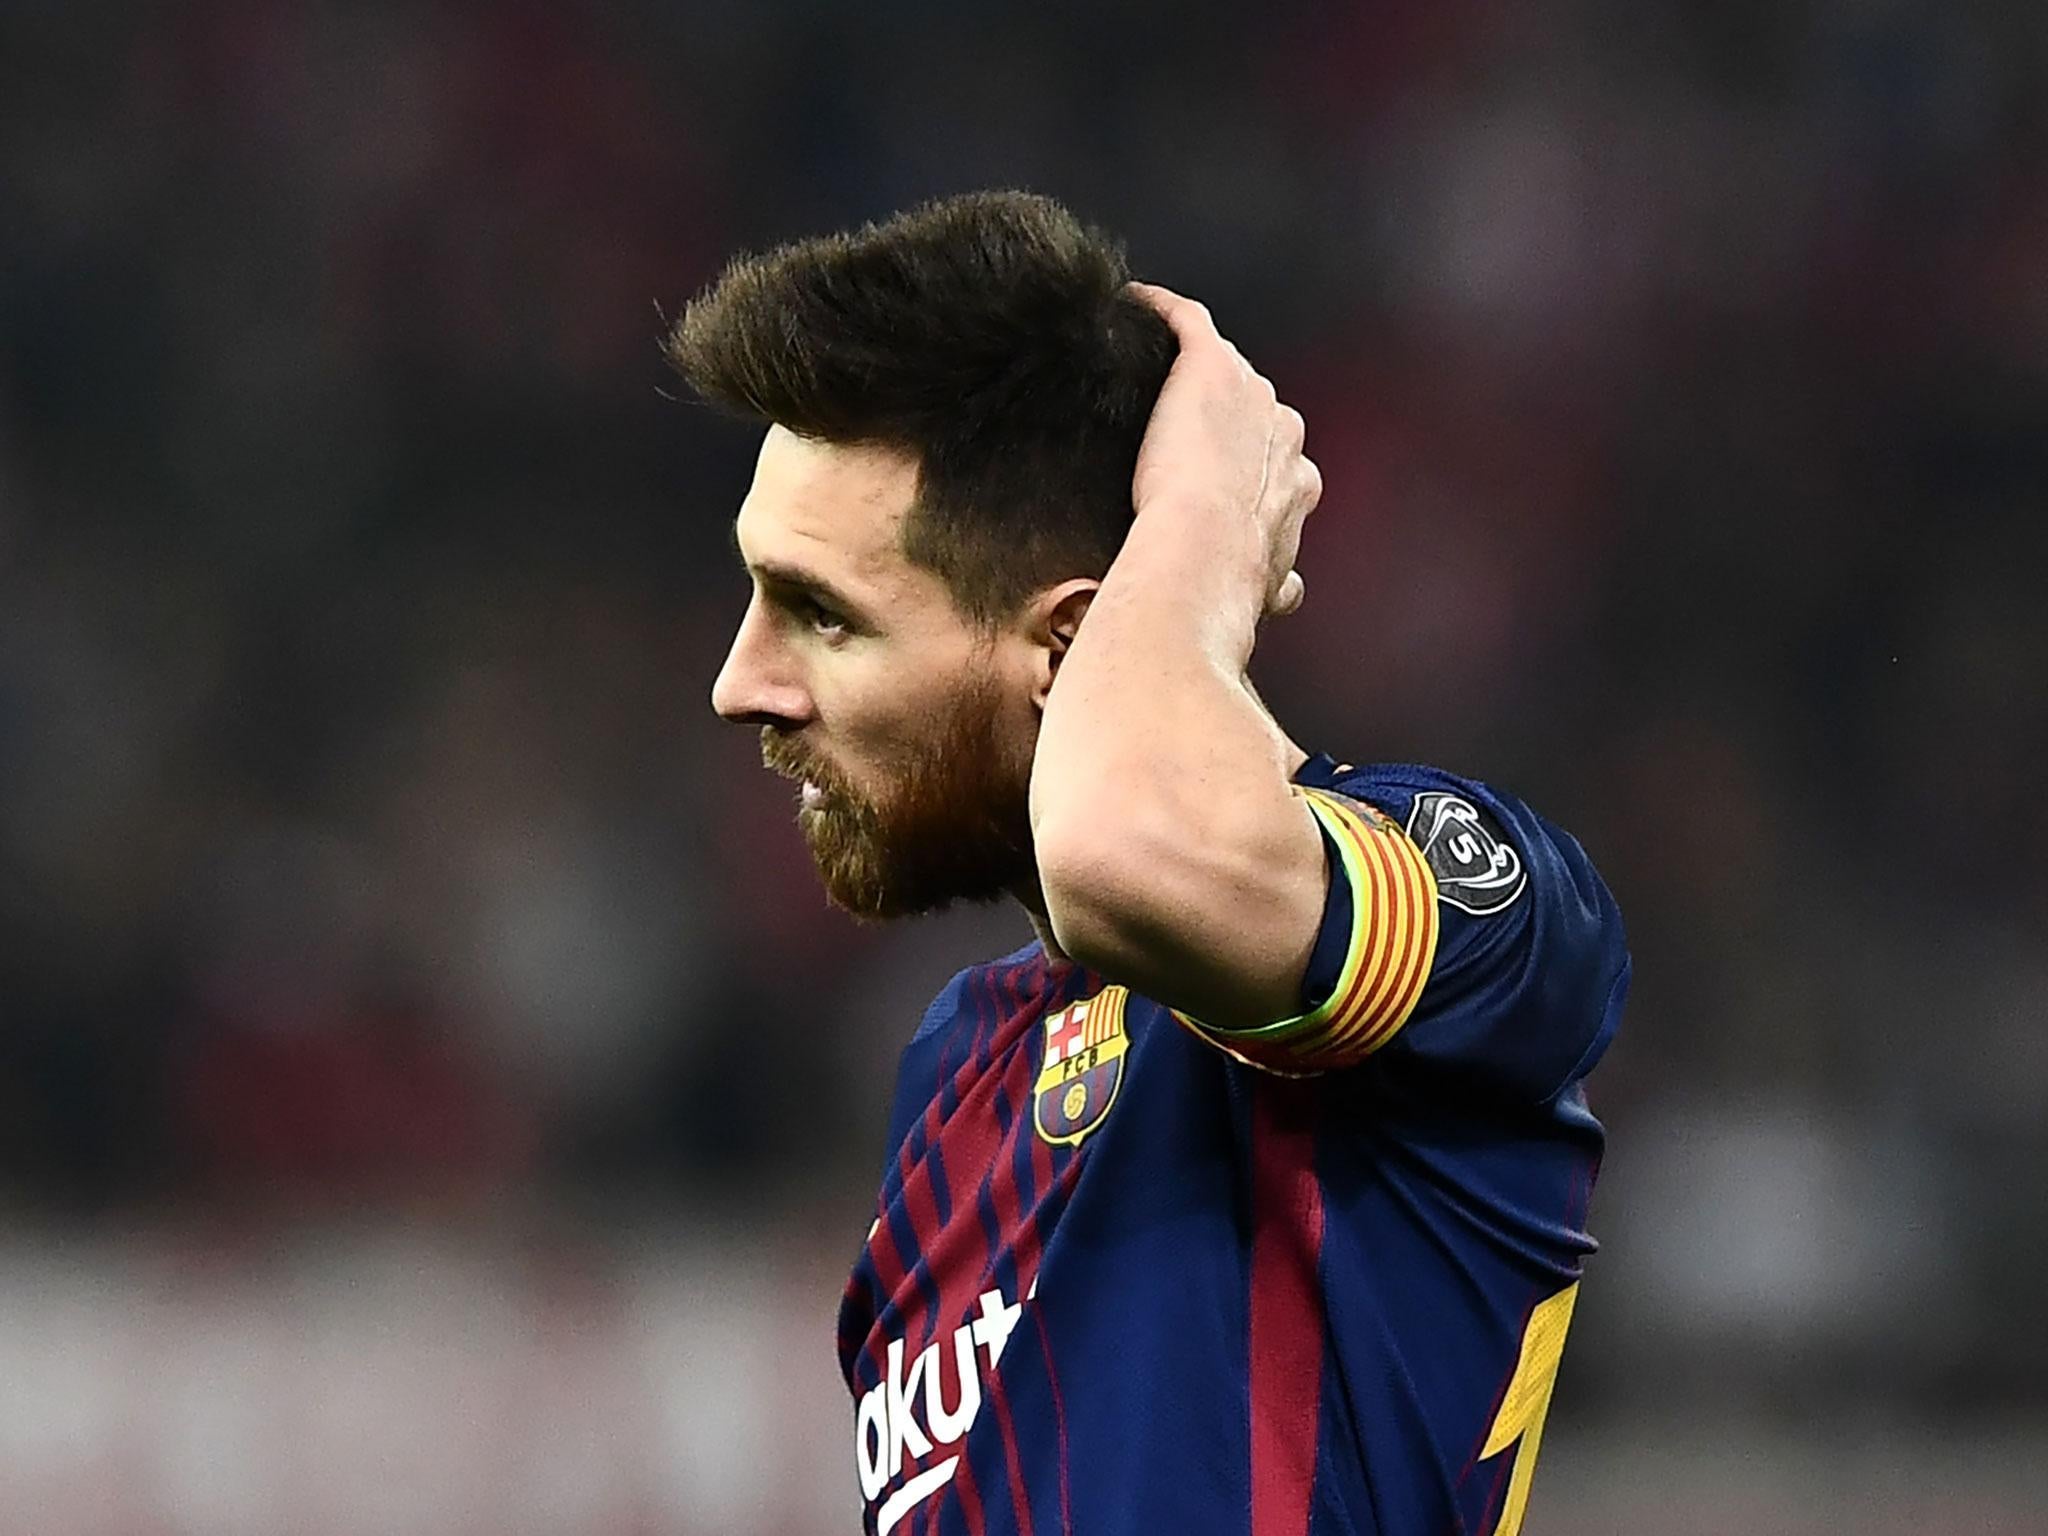 Lionel Messi's side failed to score in a group stage game for the first time in five years